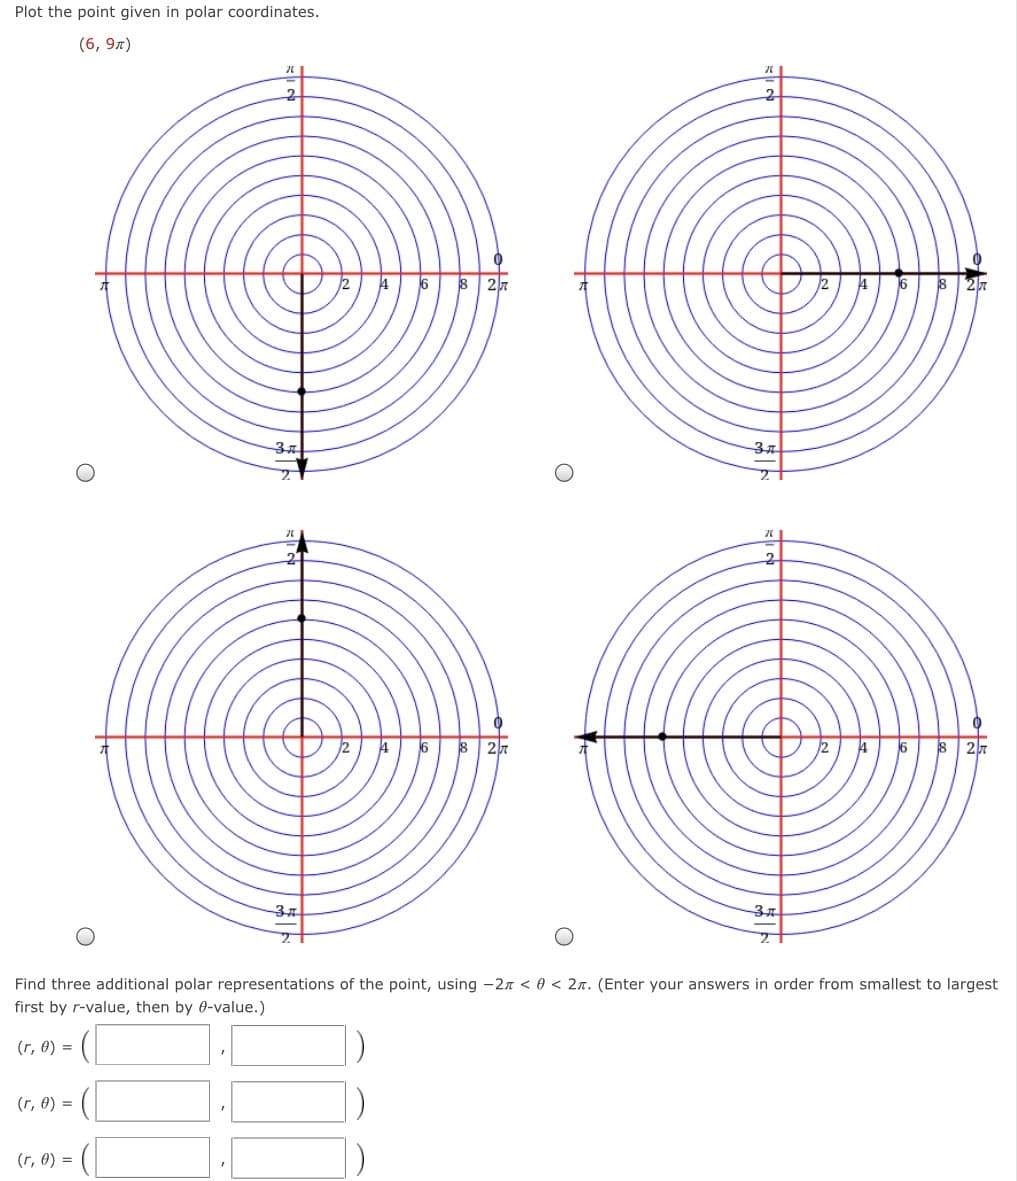 Plot the point given in polar coordinates.
(6, 9л)
37
37
Find three additional polar representations of the point, using -2n < 0 < 2n. (Enter your answers in order from smallest to largest
first by r-value, then by 0-value.)
(r, 0) =
(r, 0) =
(r, 0) =
